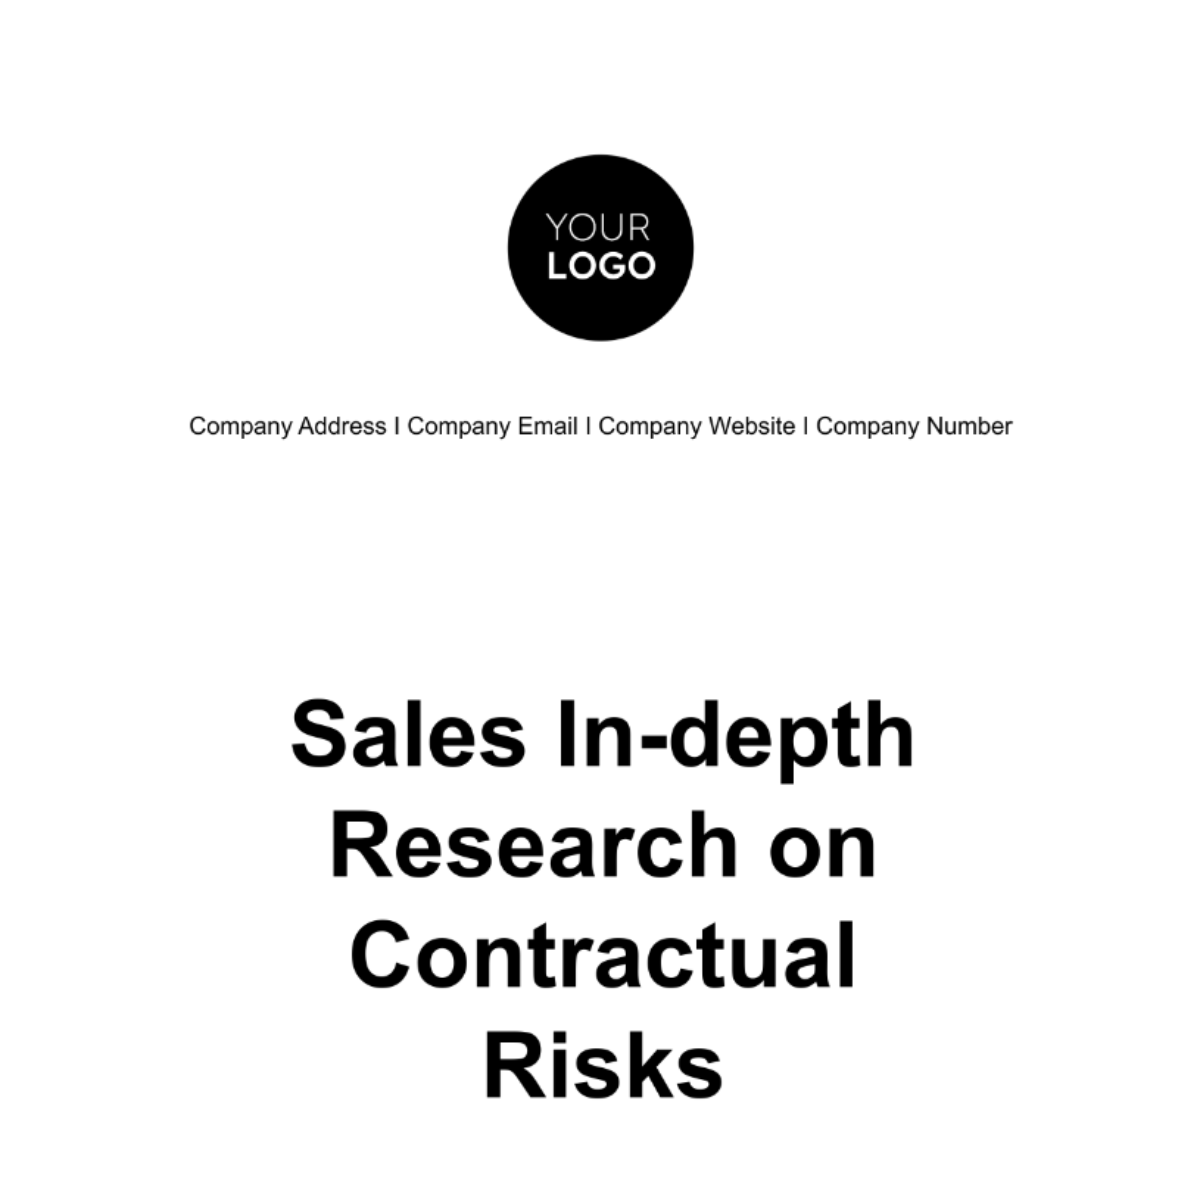 Free Sales In-depth Research on Contractual Risks Template